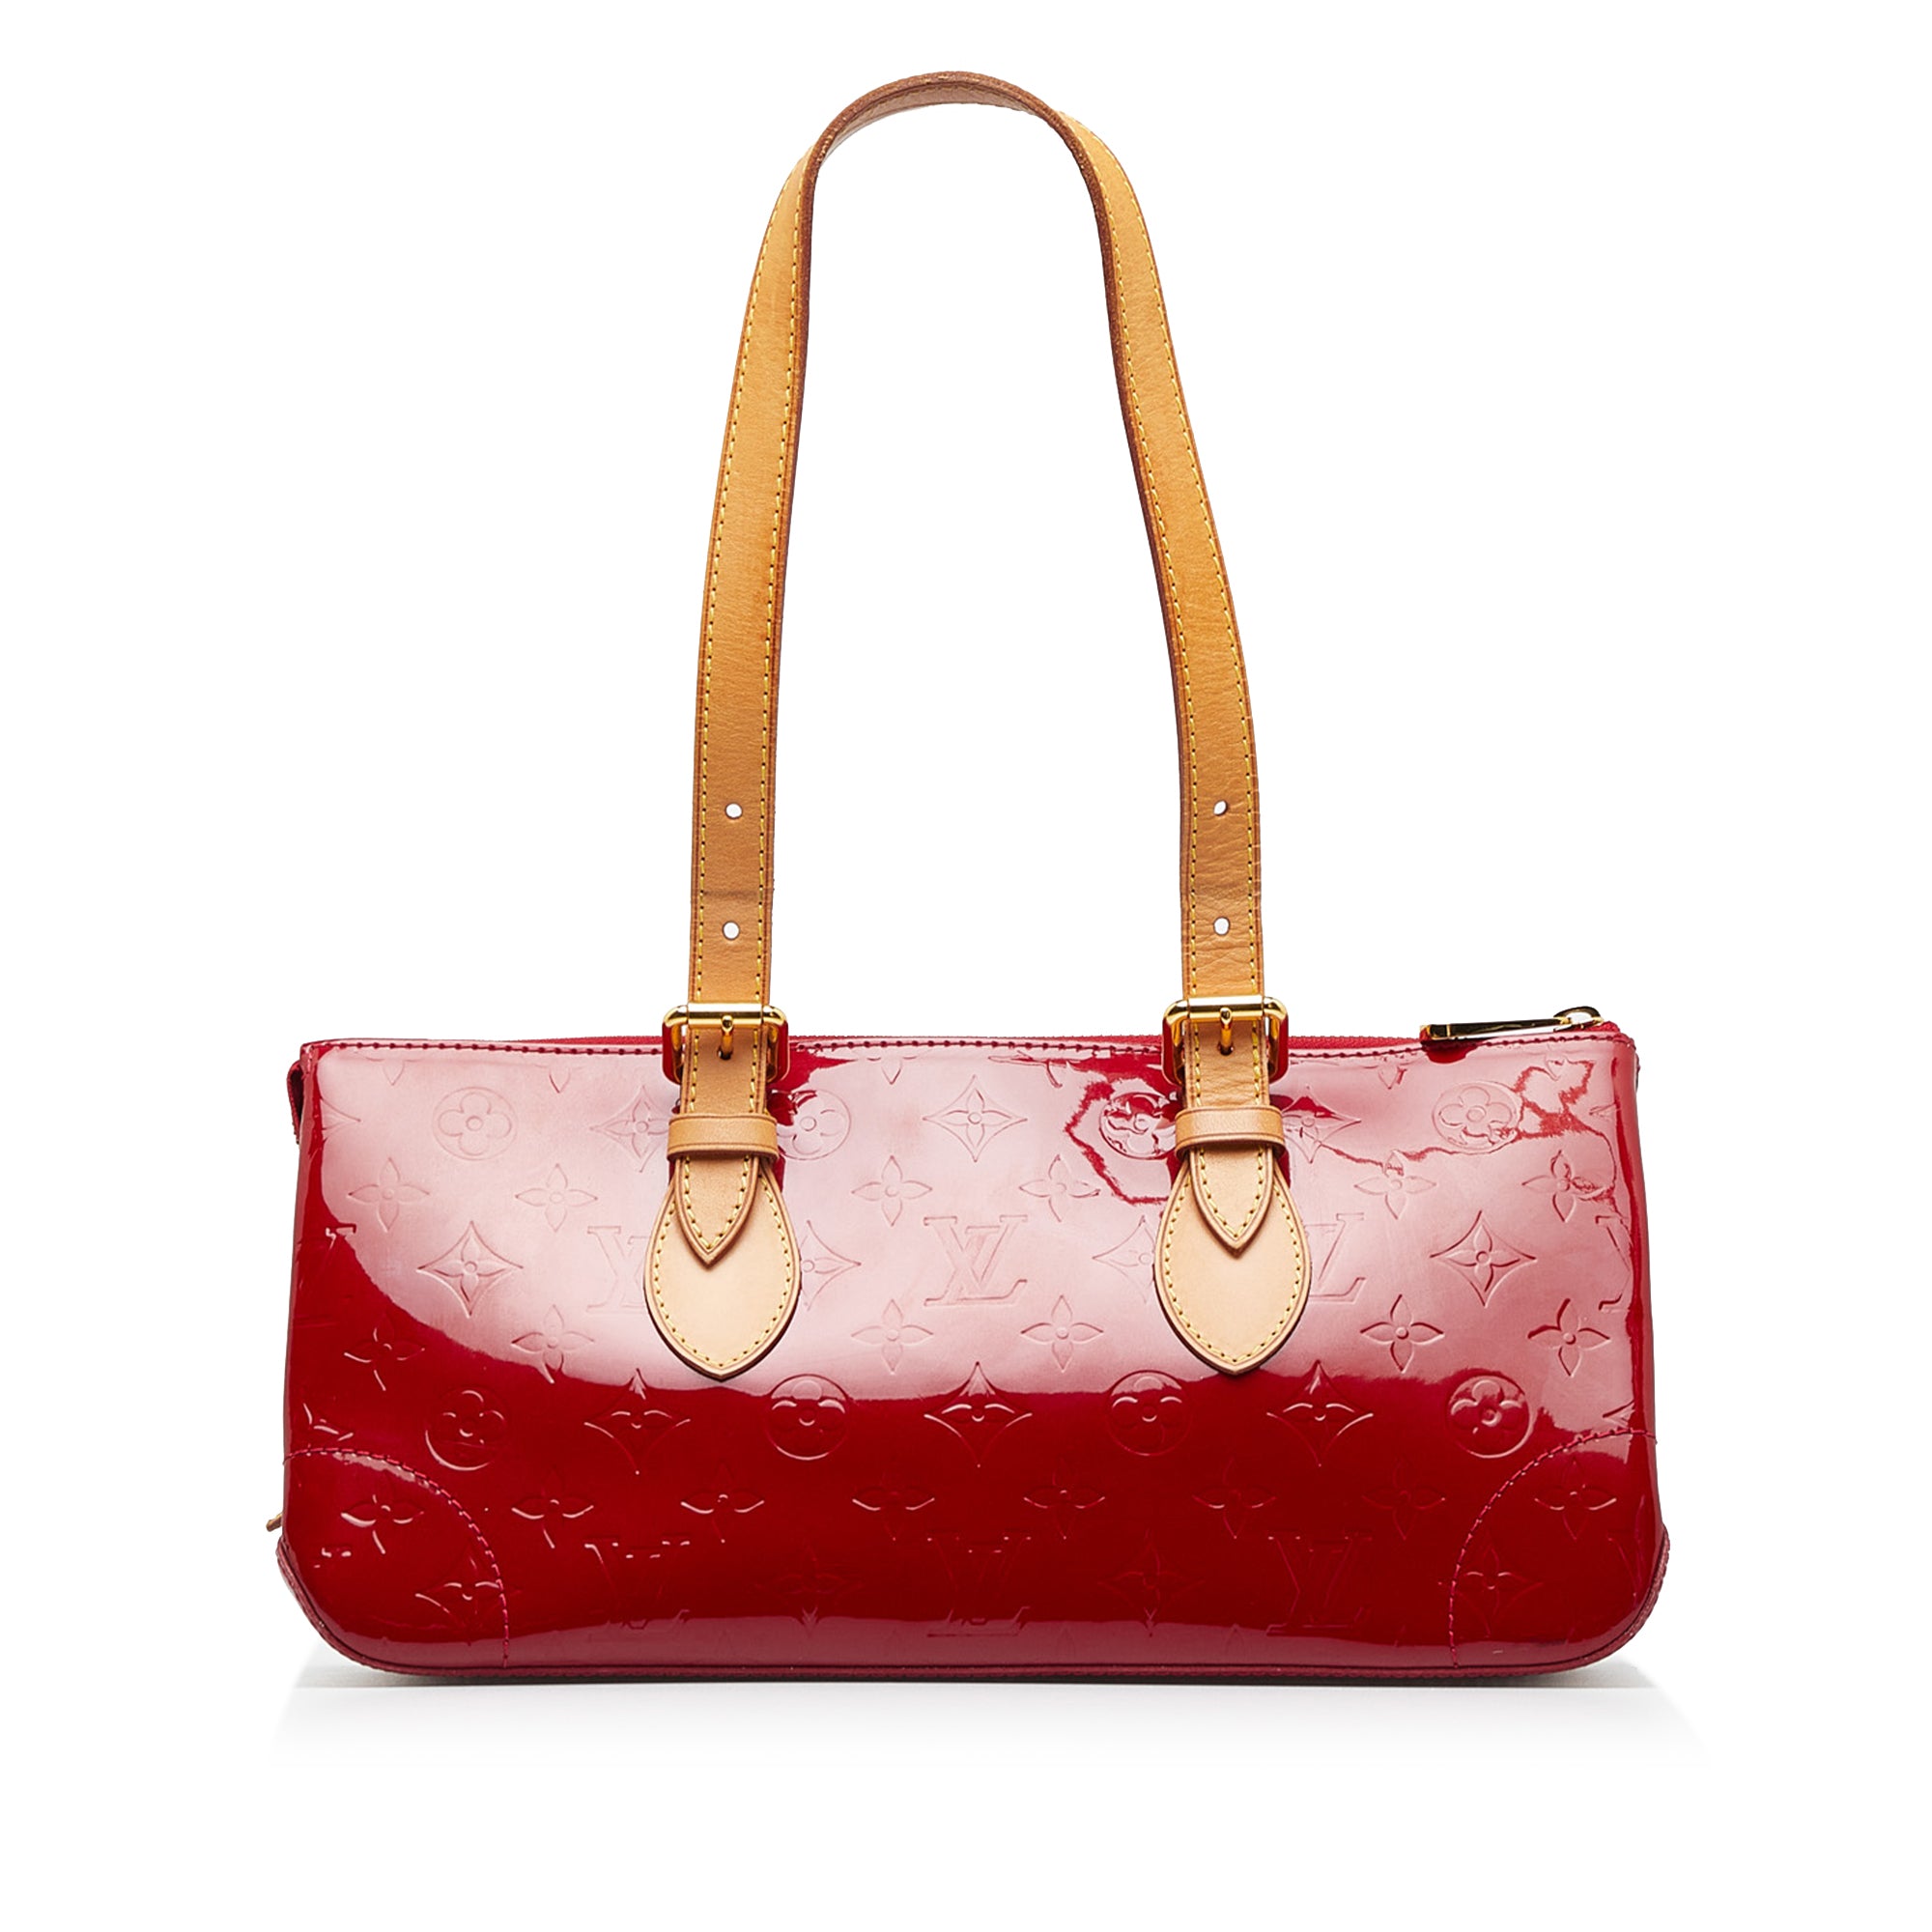 Louis Vuitton - Authenticated Handbag - Patent Leather Burgundy for Women, Very Good Condition